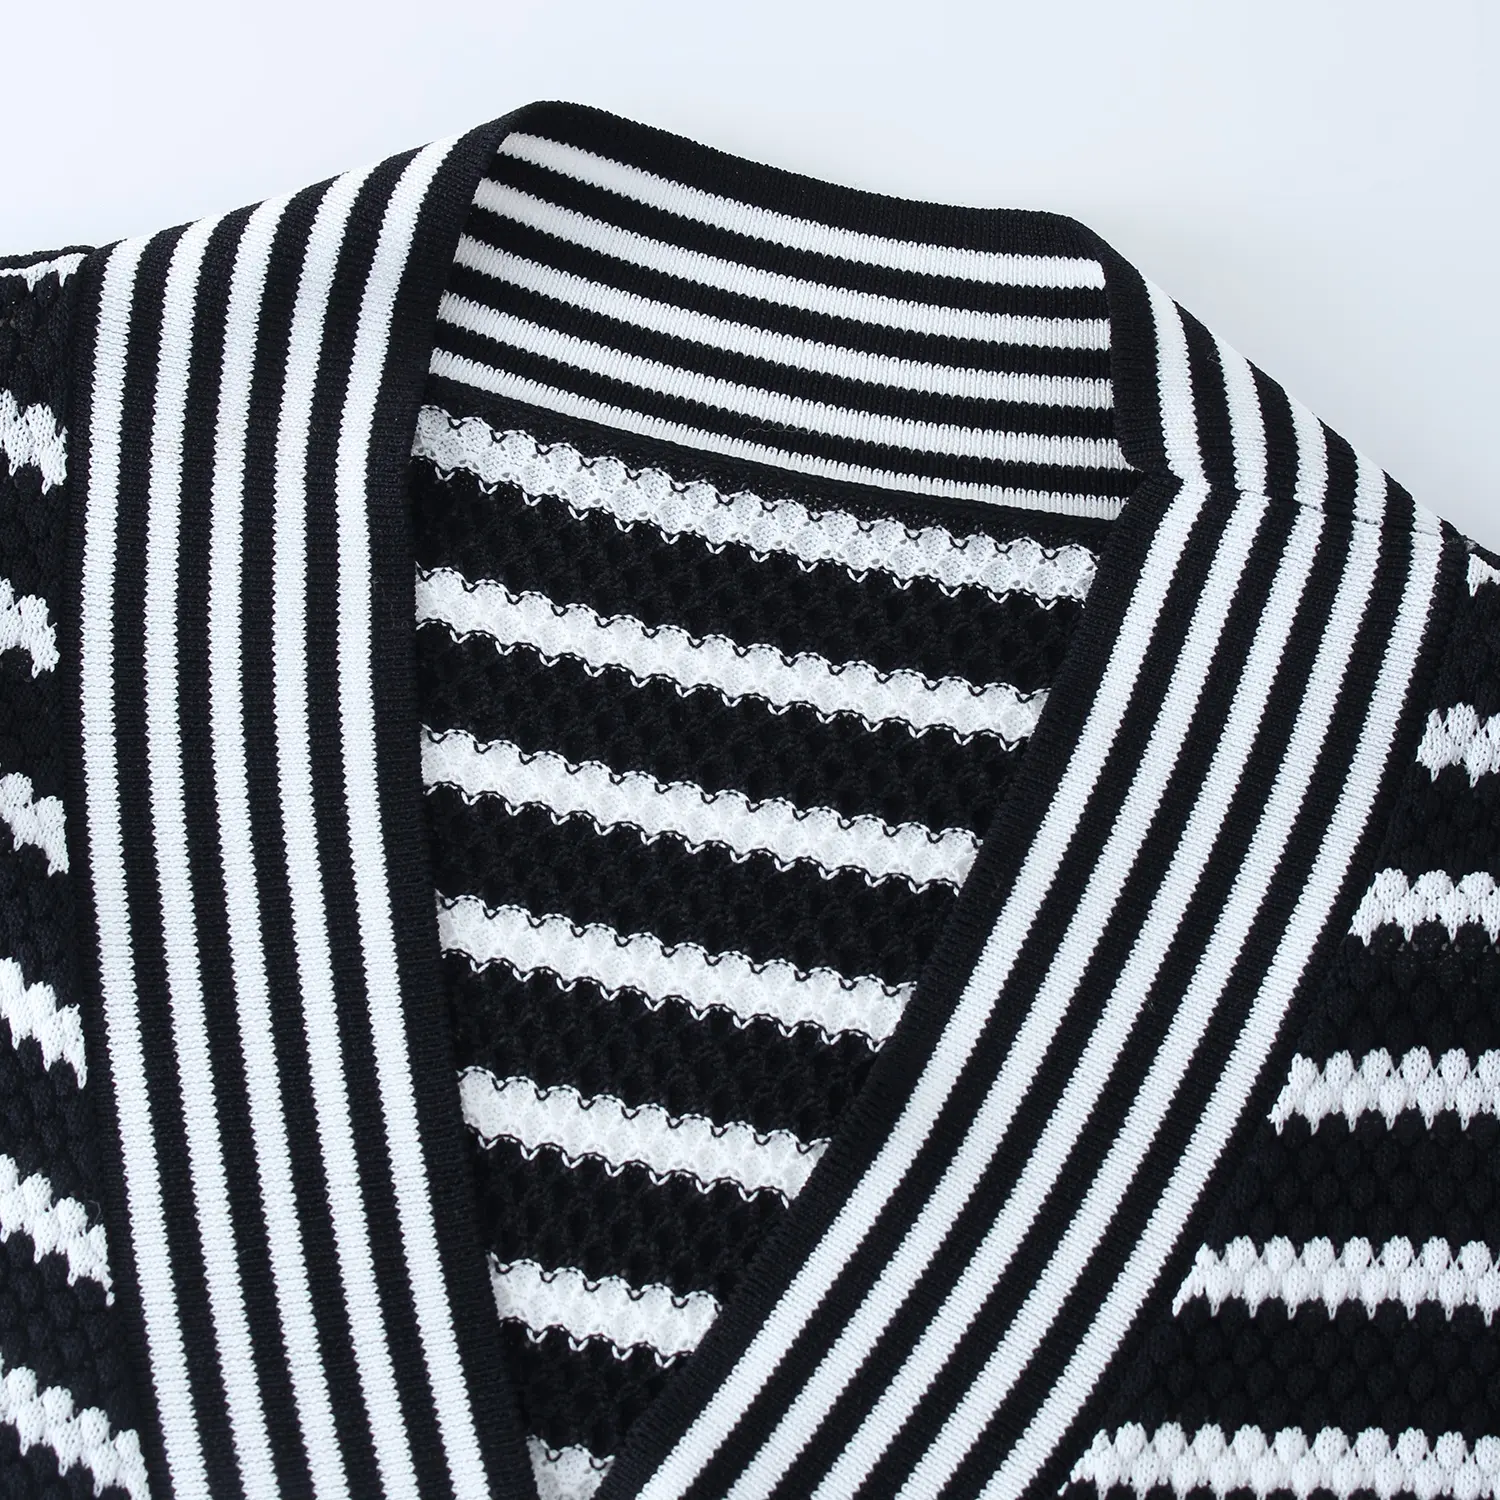 Custom Knitwear Manufacturers V Neck Bow Detailed Black White Striped Knit Sweater Cardigan Women Ladies